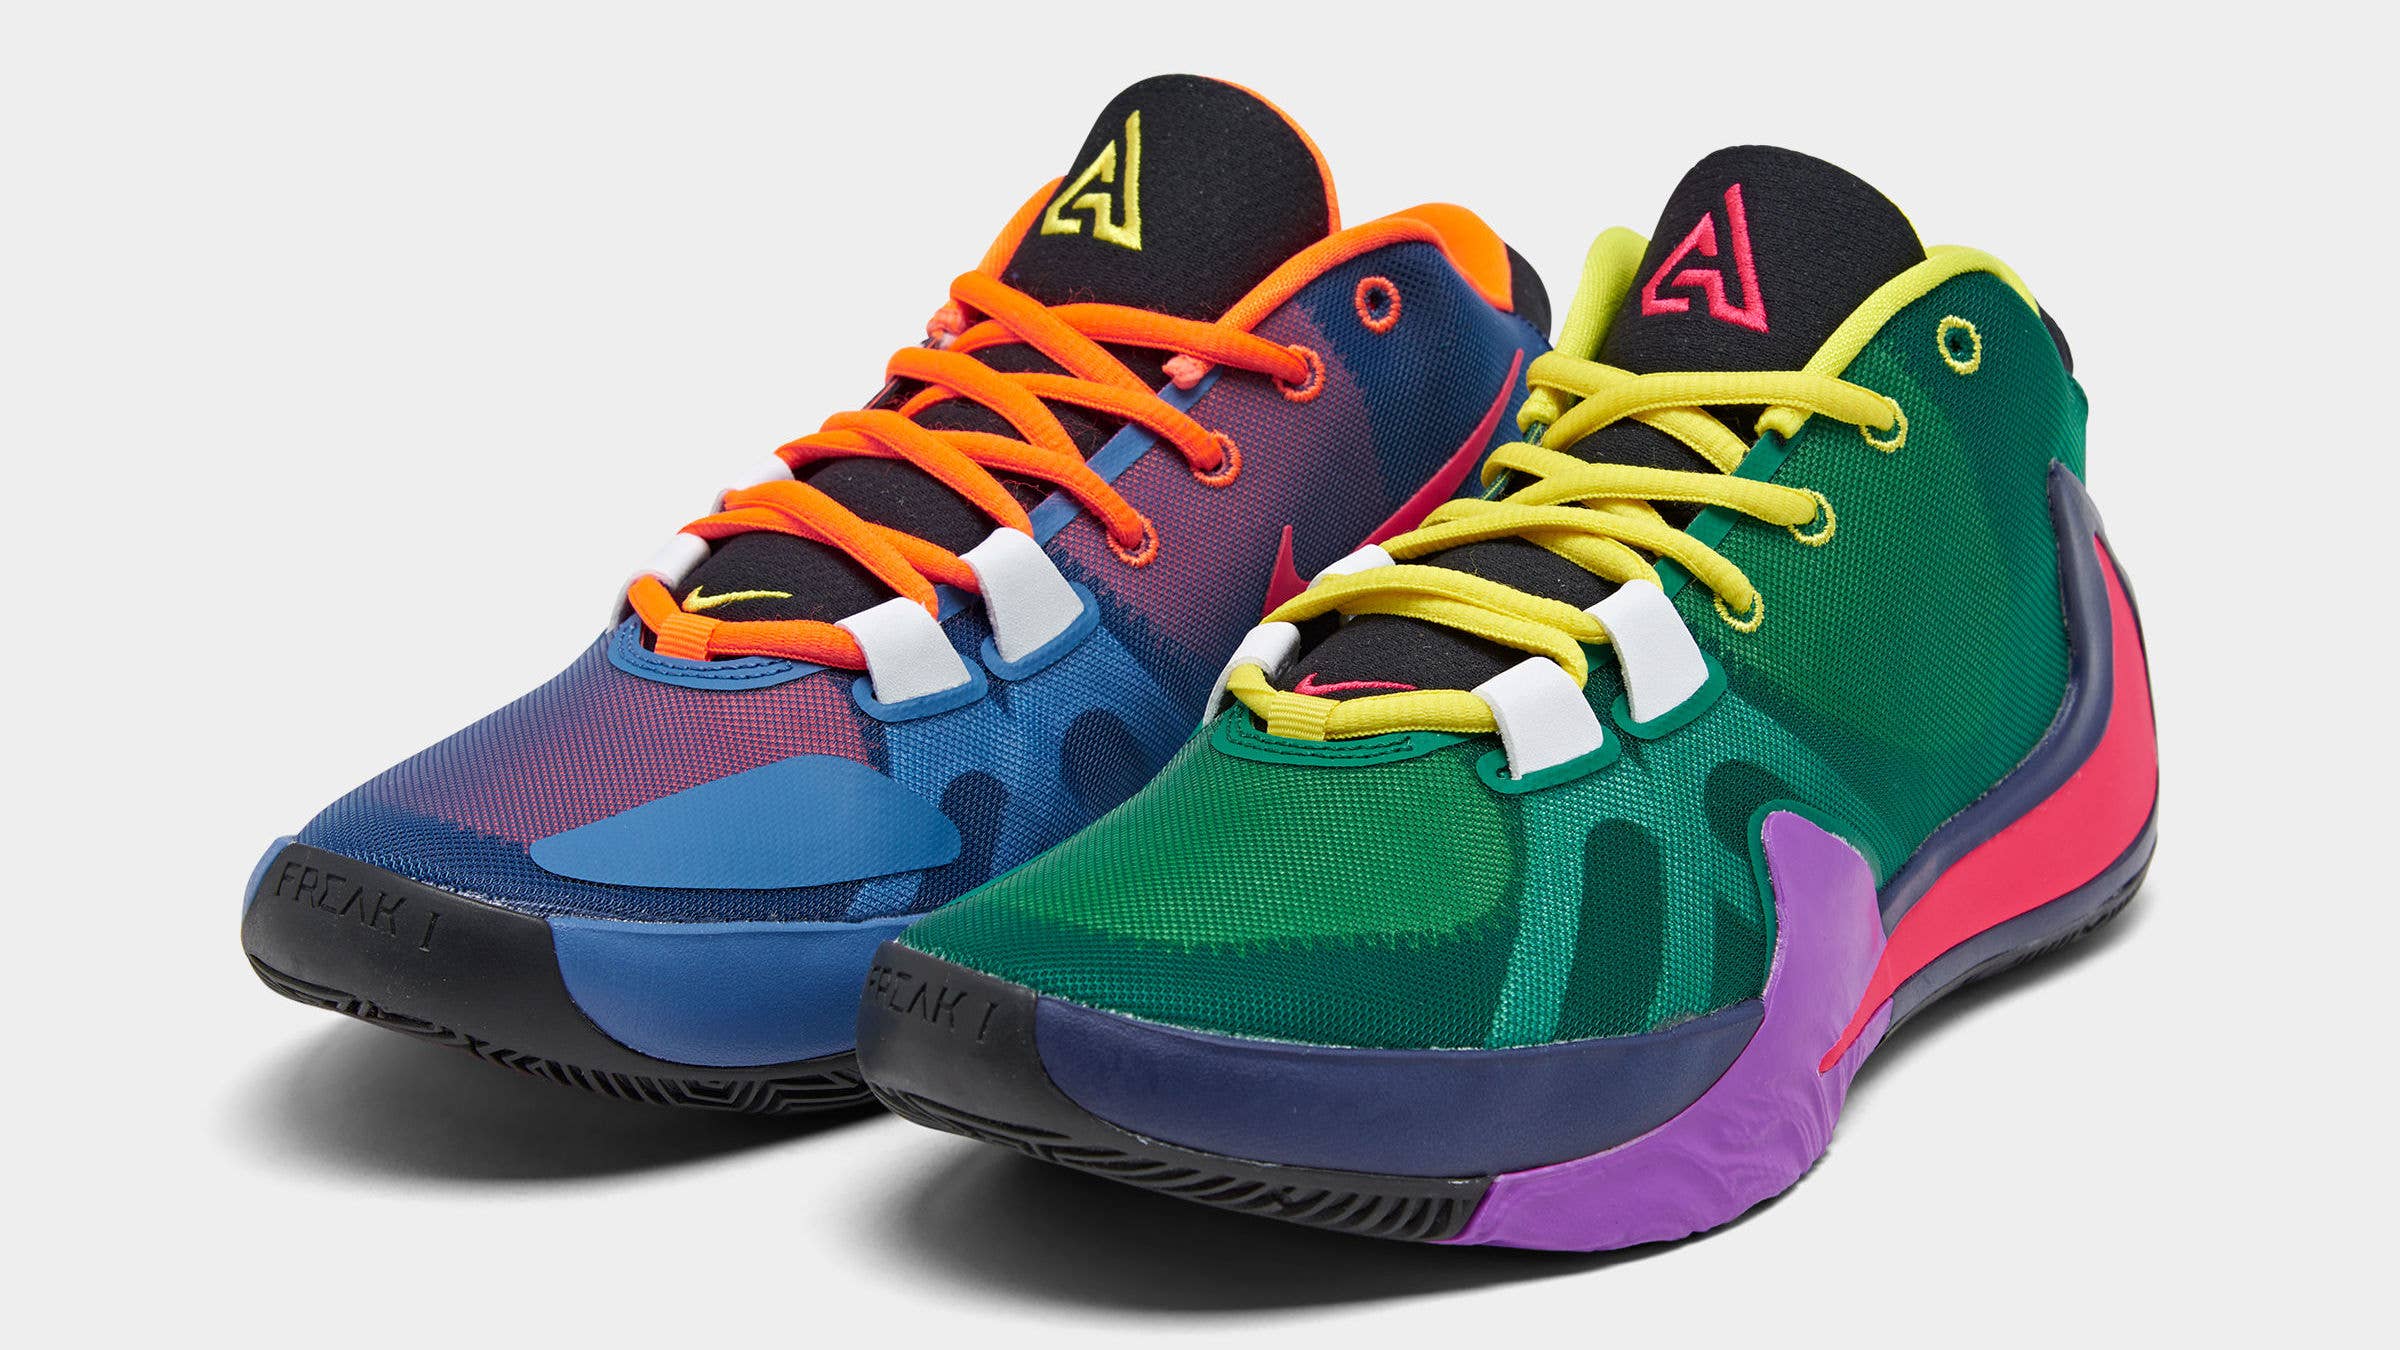 Giannis Antetokounmpo's Signature Shoe Gets a 'What The' Style Colorway | Complex